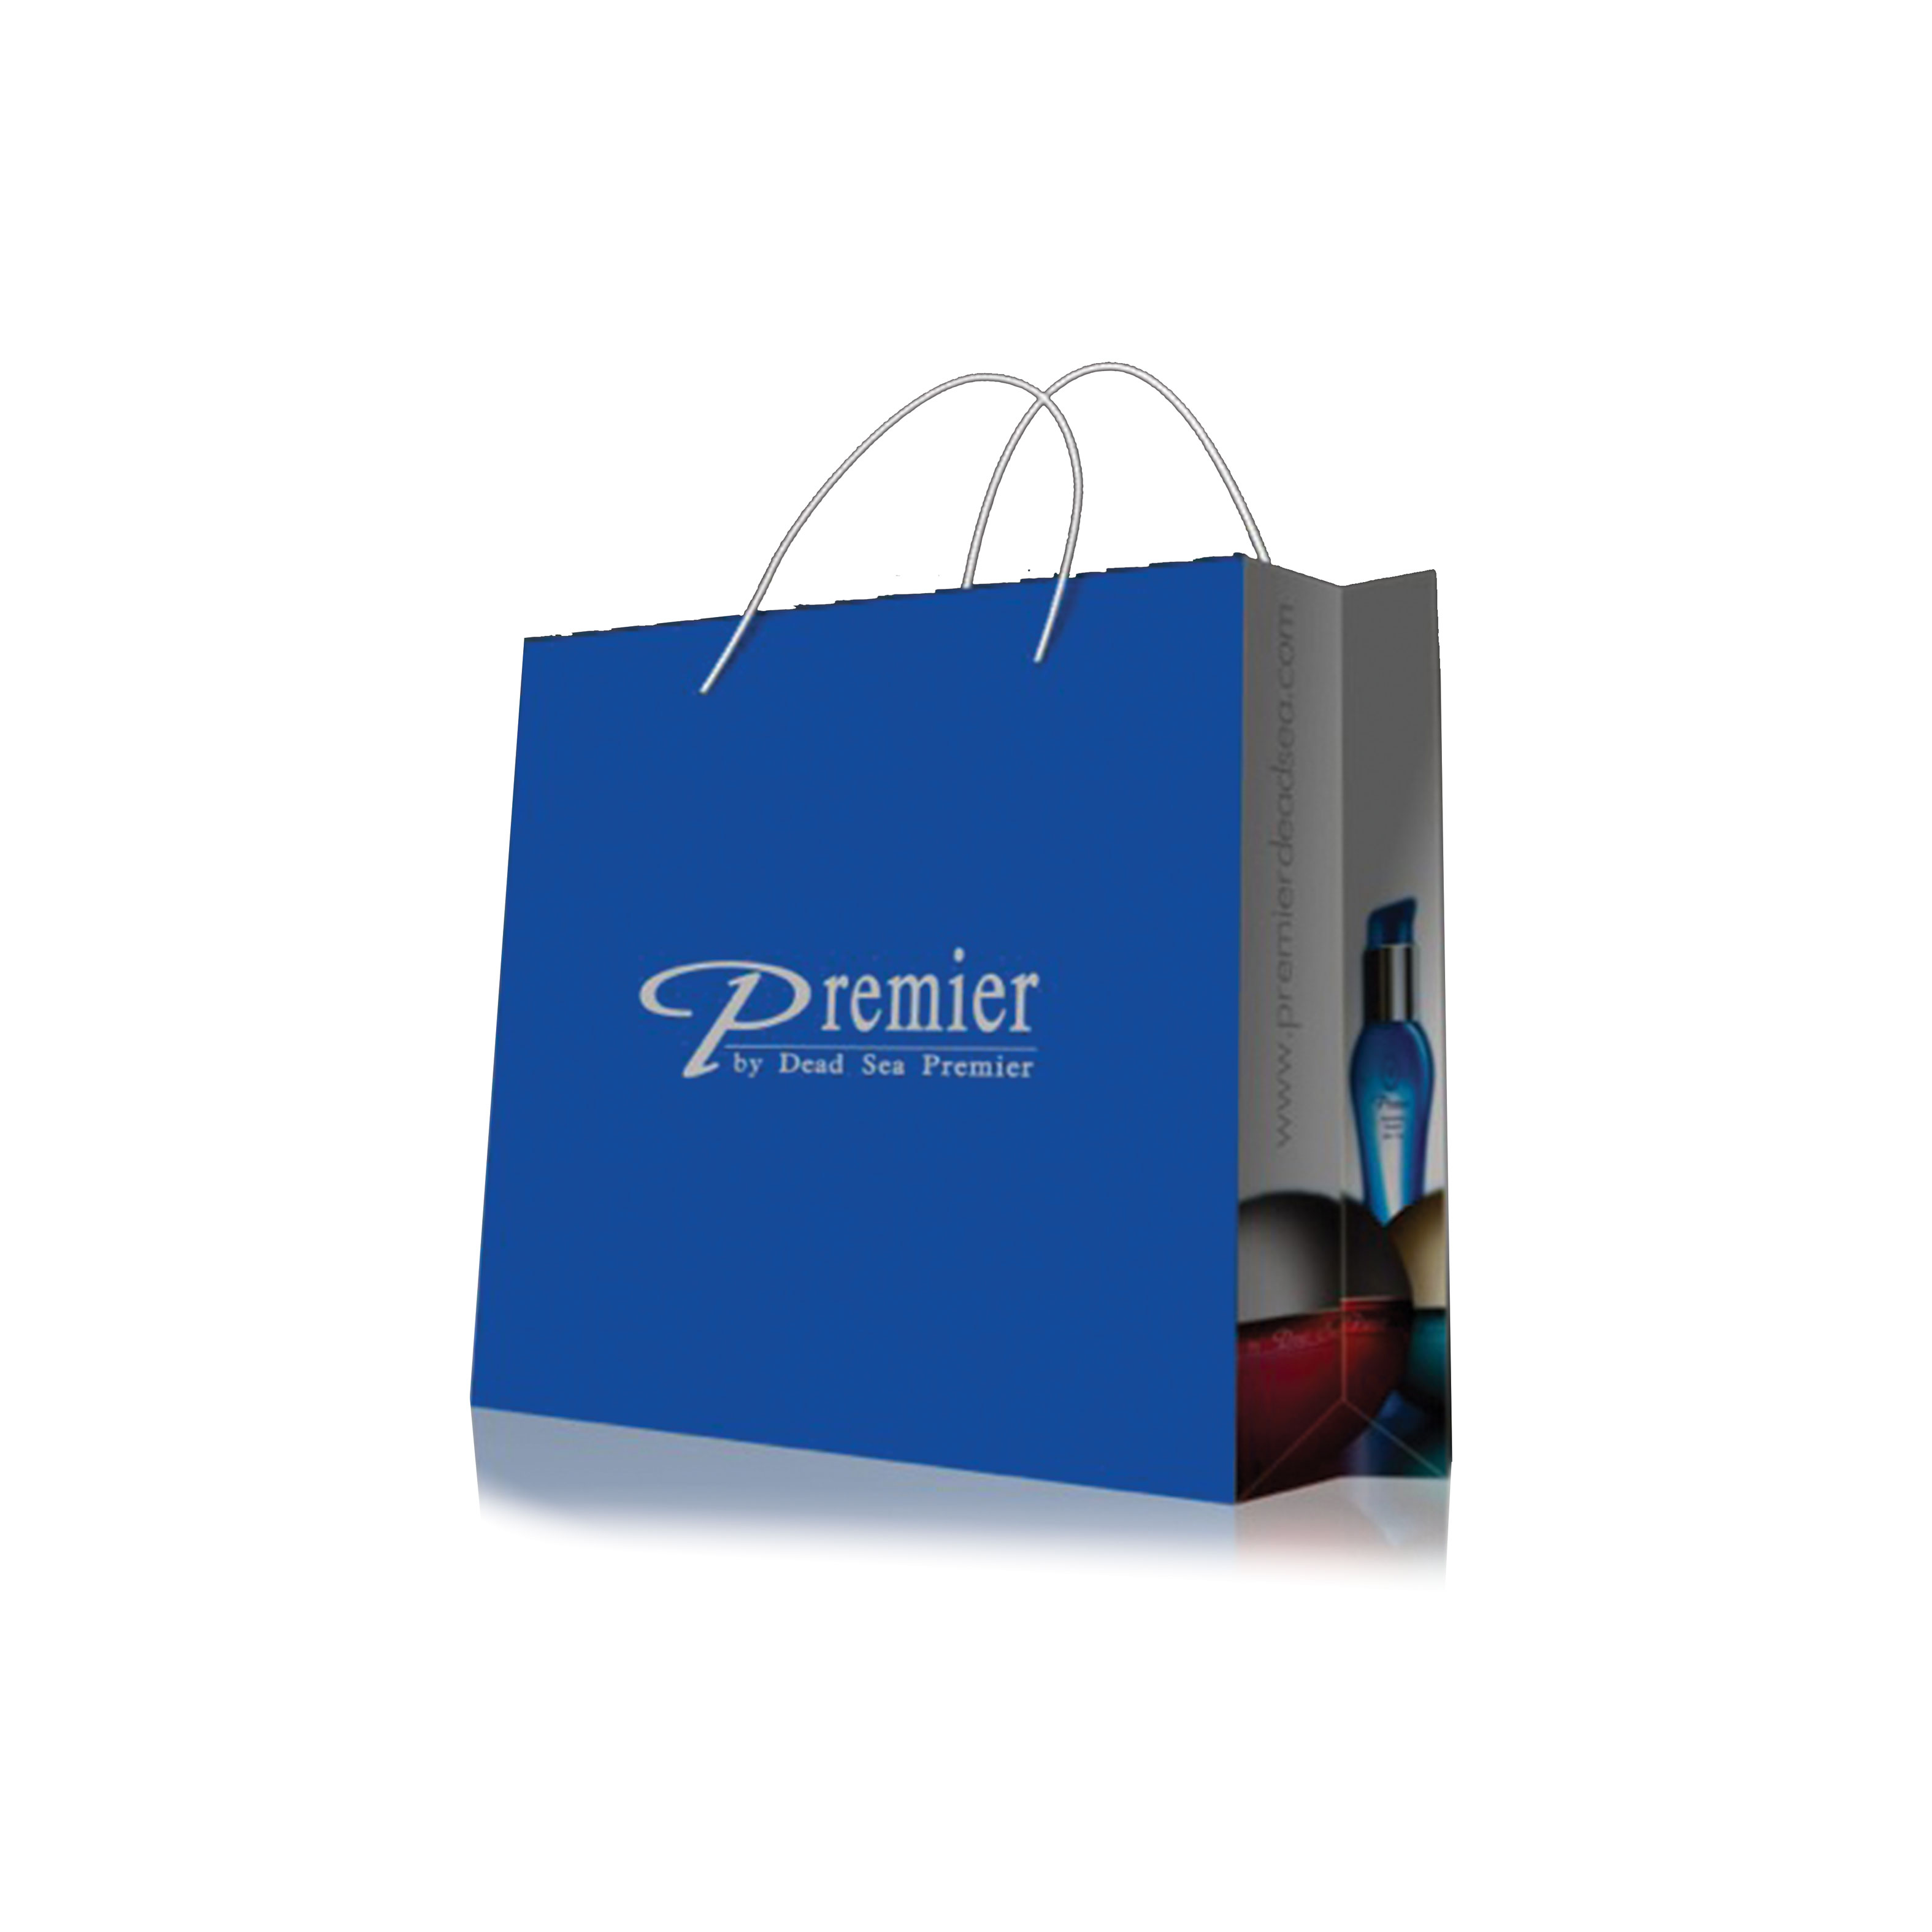 Sample of a shopping bag created for Premier Dead Sea Skin Care that shows images of the skin care bottles on the side.